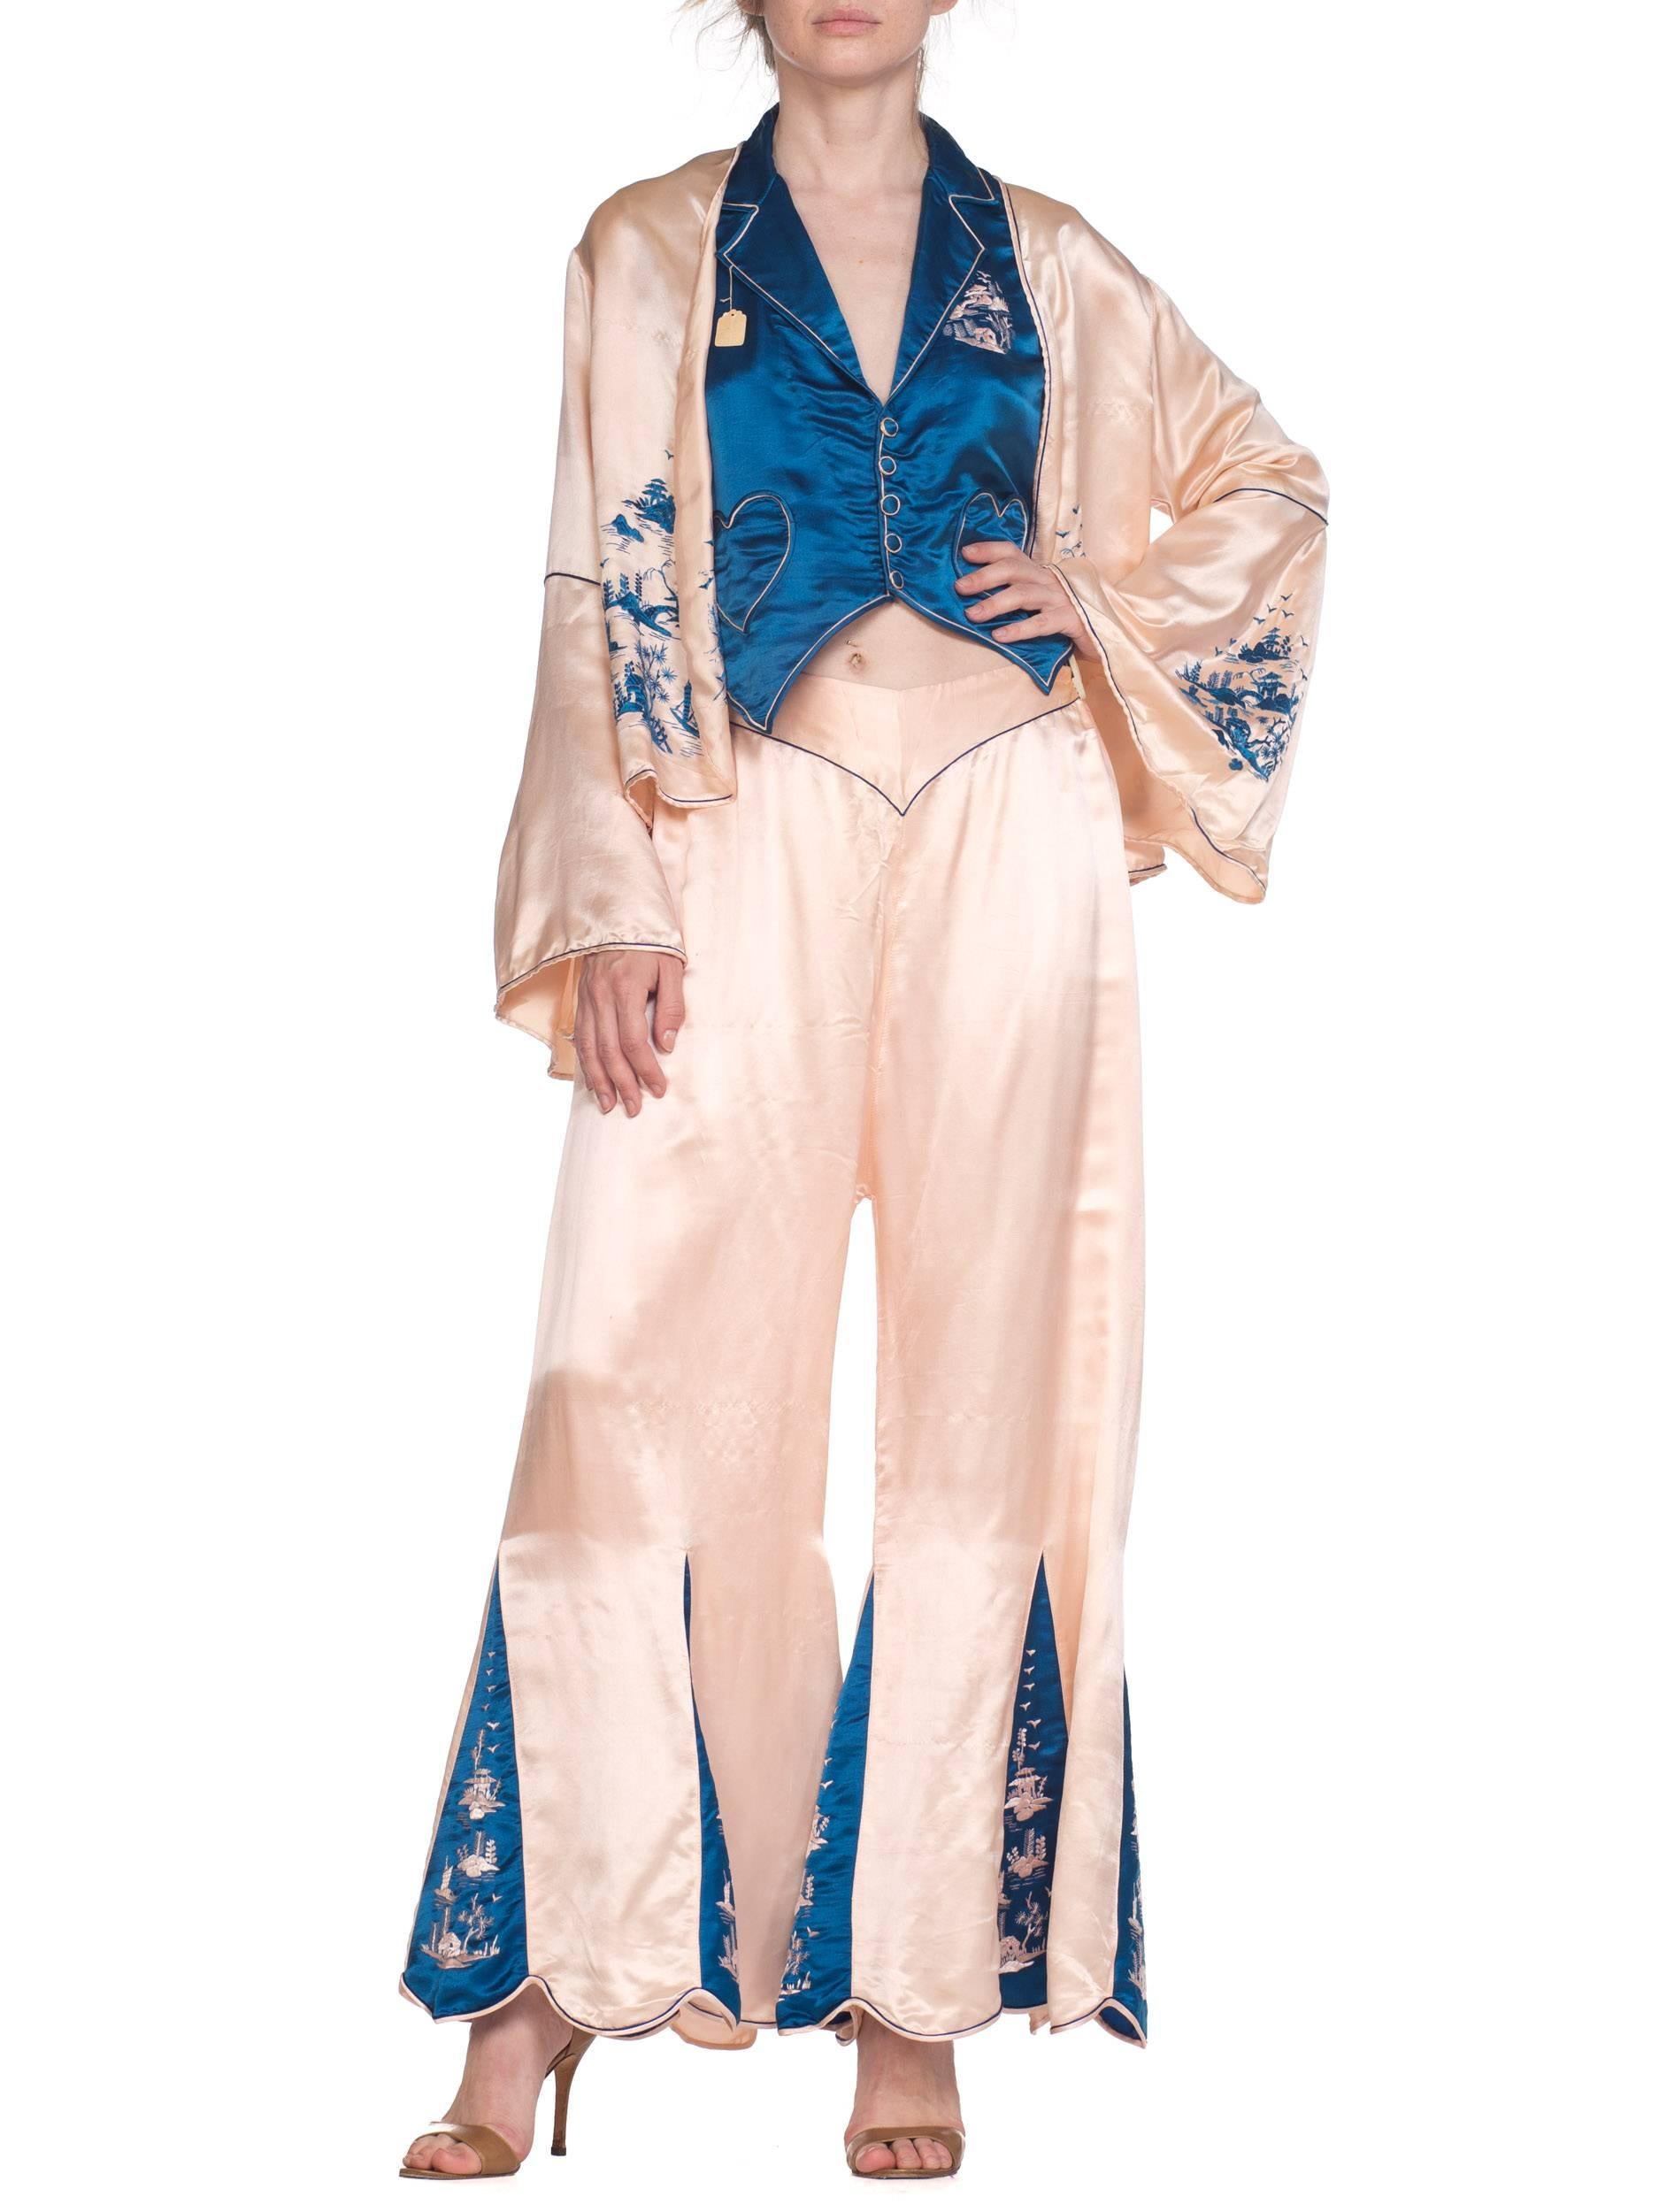 Women's 1920s 3 Piece Blue and Cream Chinese Beach Pajamas With Hand Embroidery